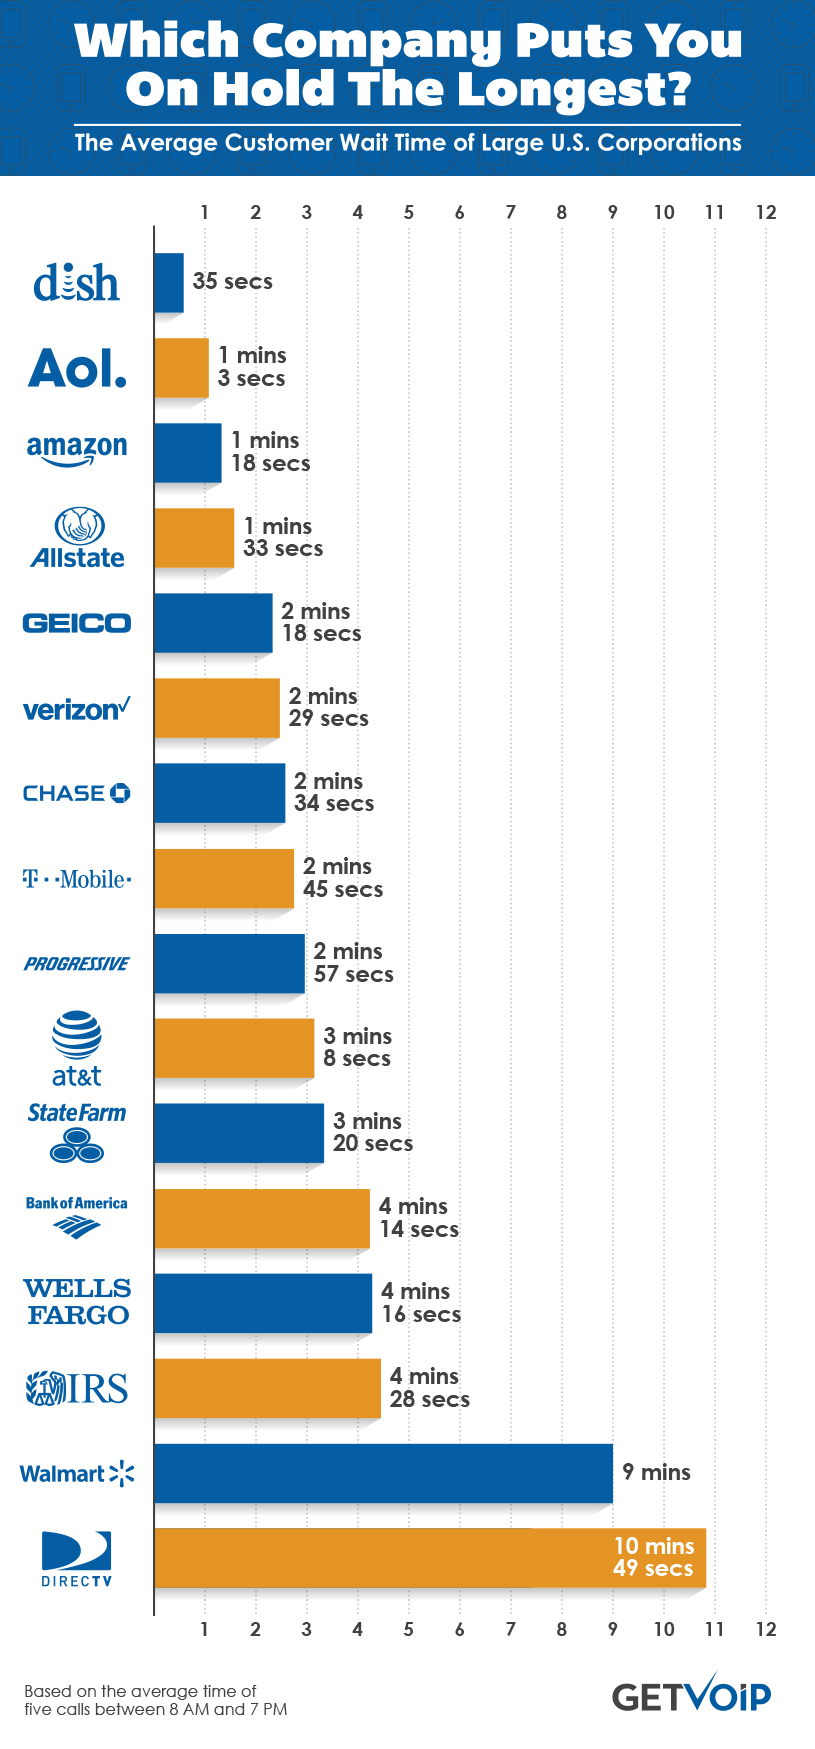 a graph showing the biggest companies and their longest hold times